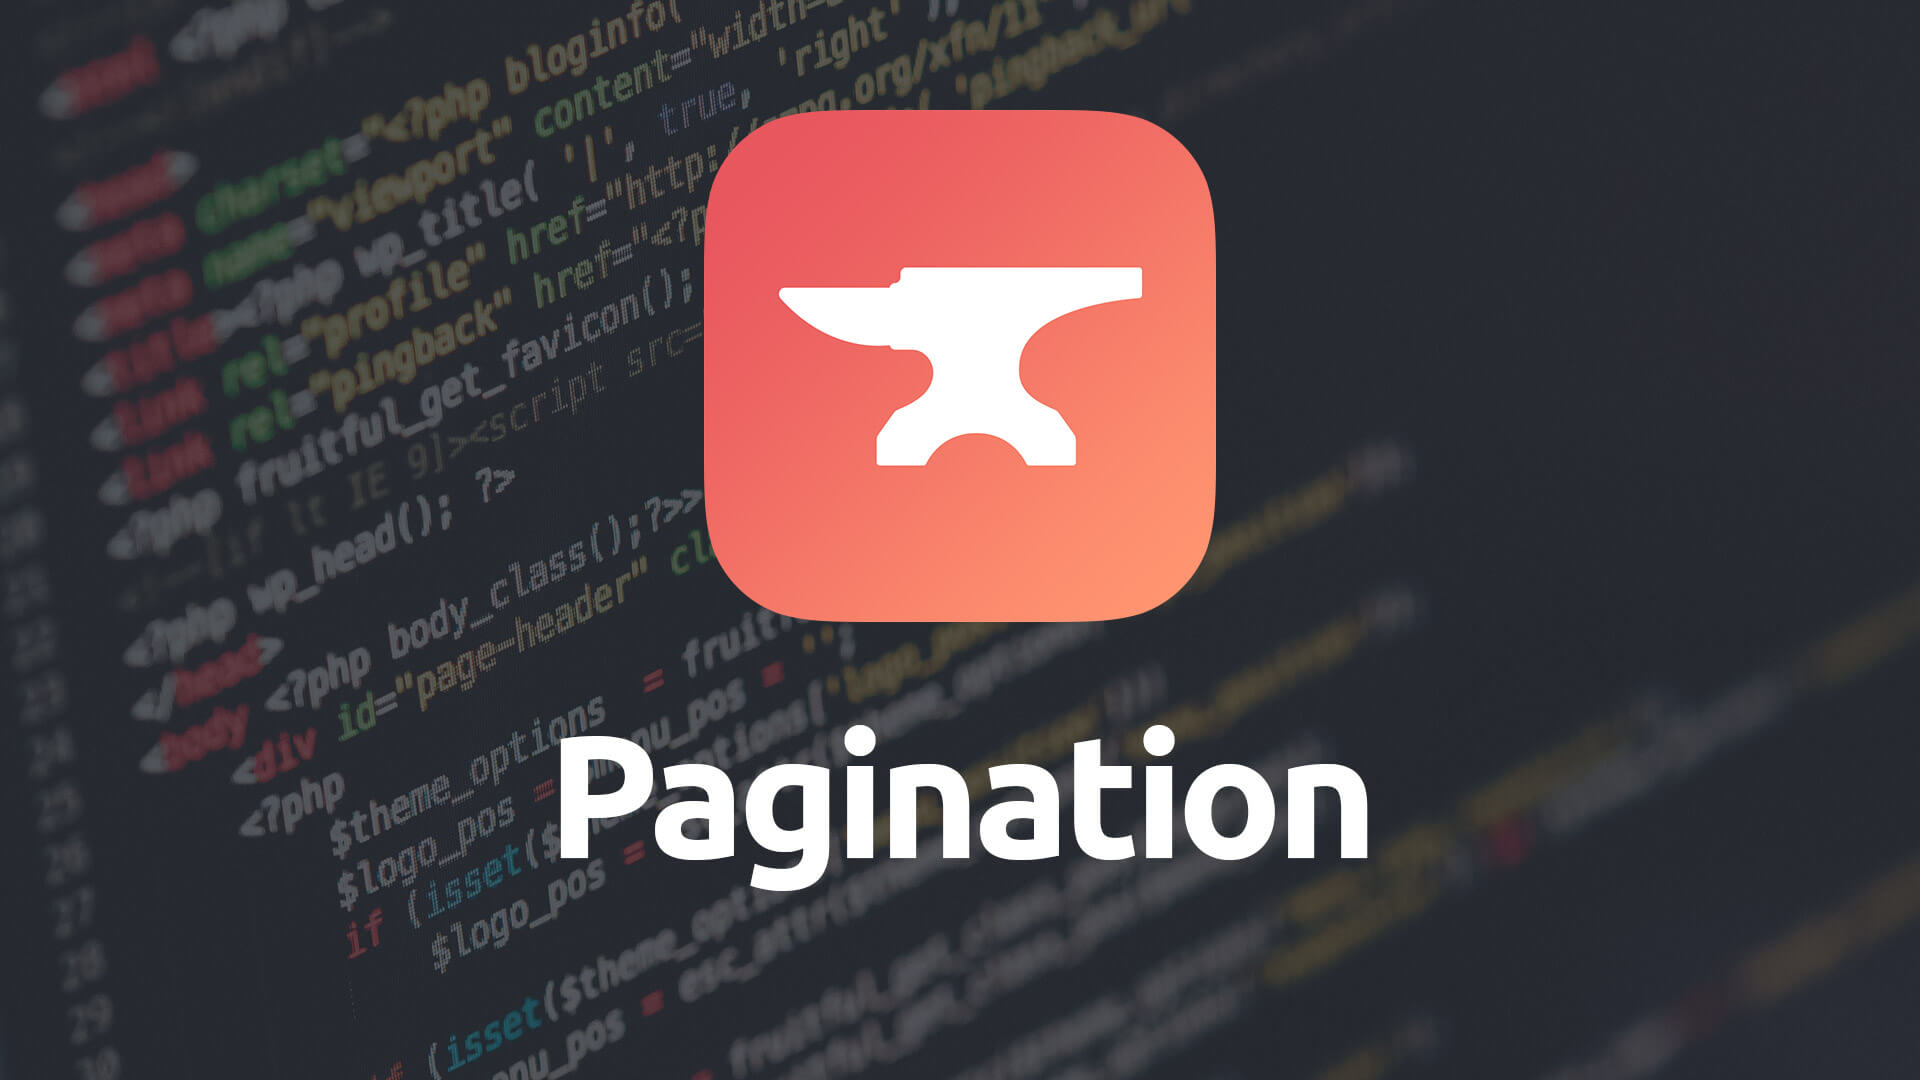 Using the Pagination Stack